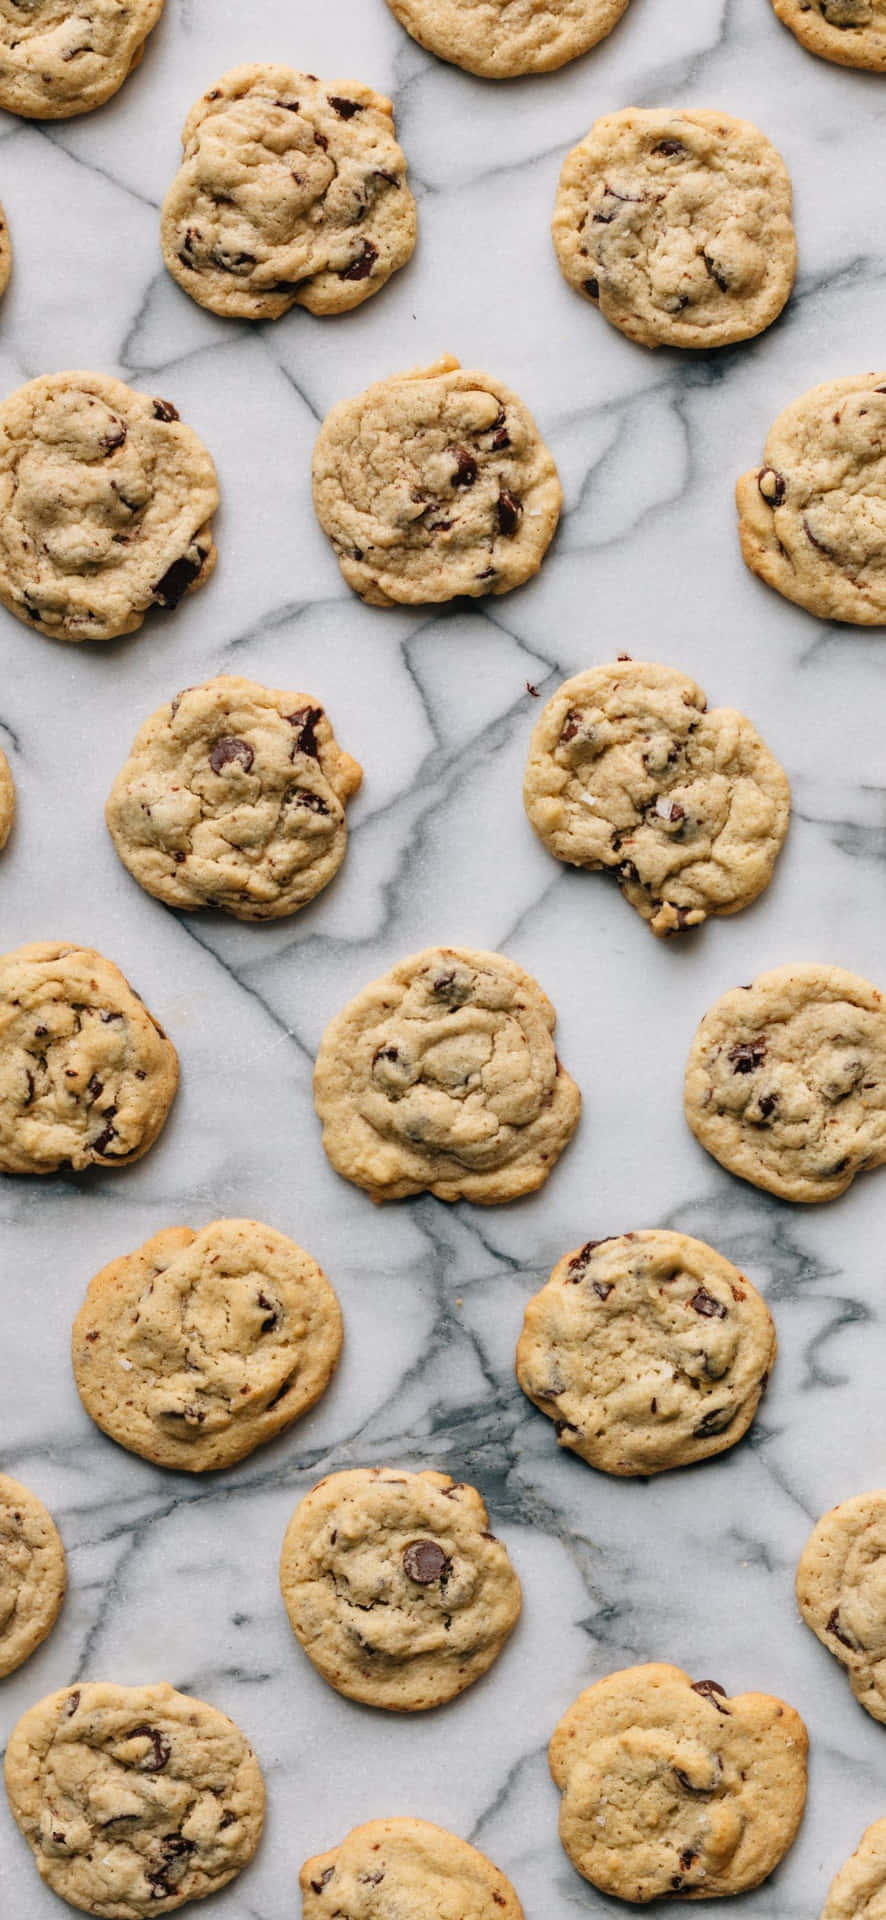 Chocolate Chip Cookies On A Marble Surface Wallpaper